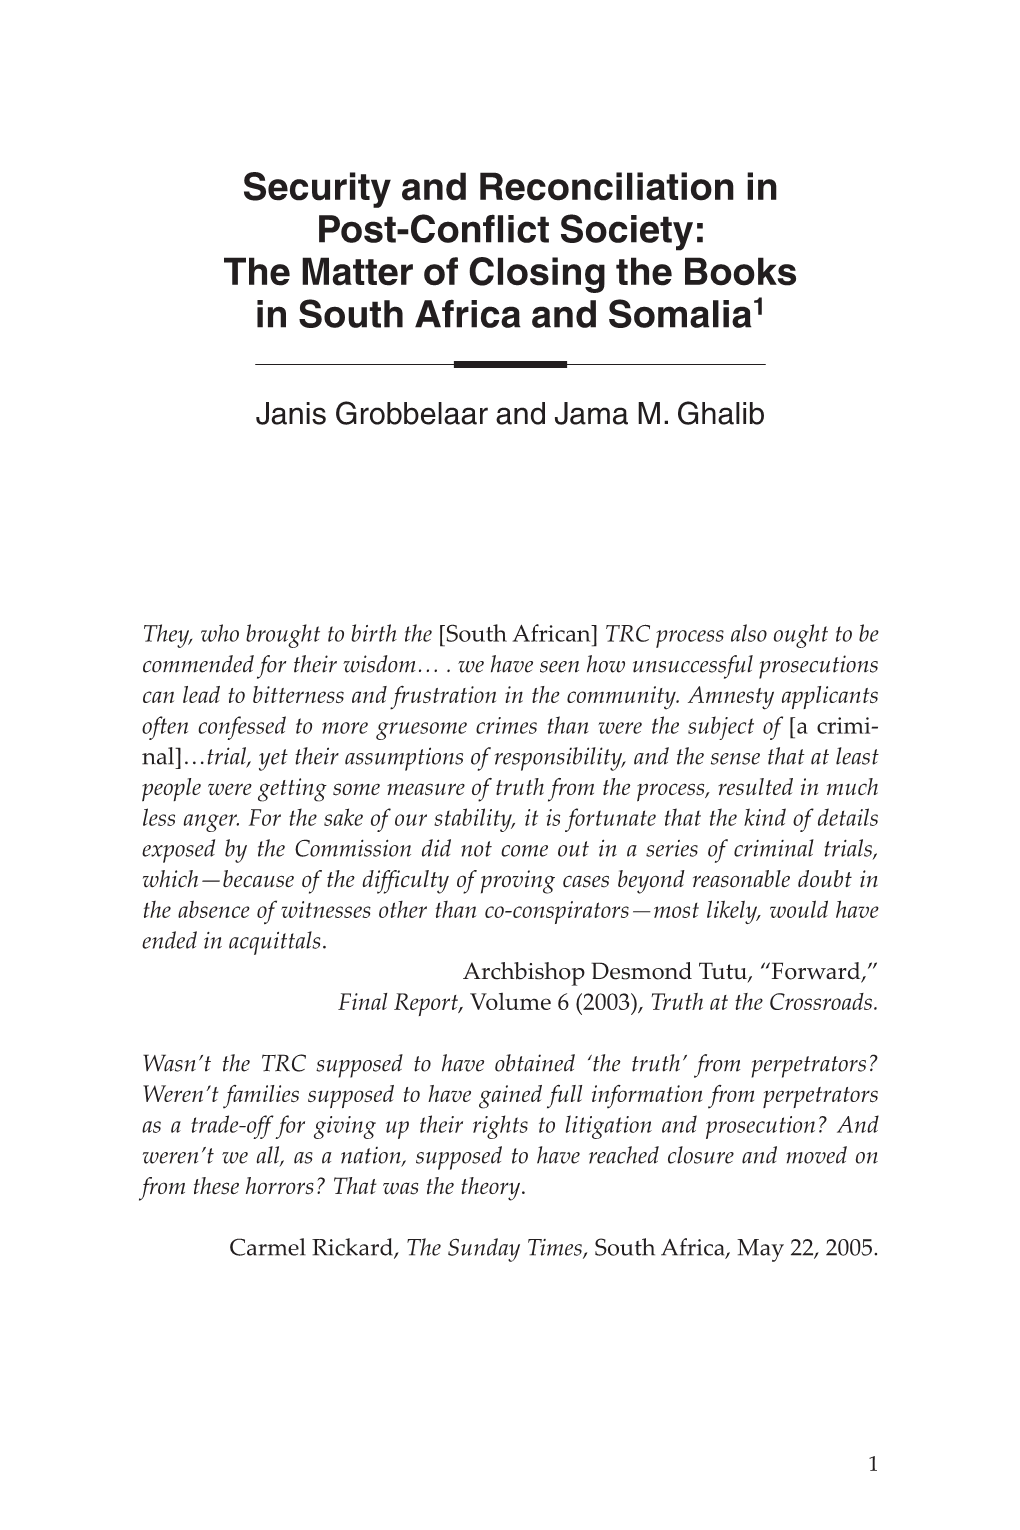 Security and Reconciliation in Post-Conflict Society: the Matter of Closing the Books in South Africa and Somalia1